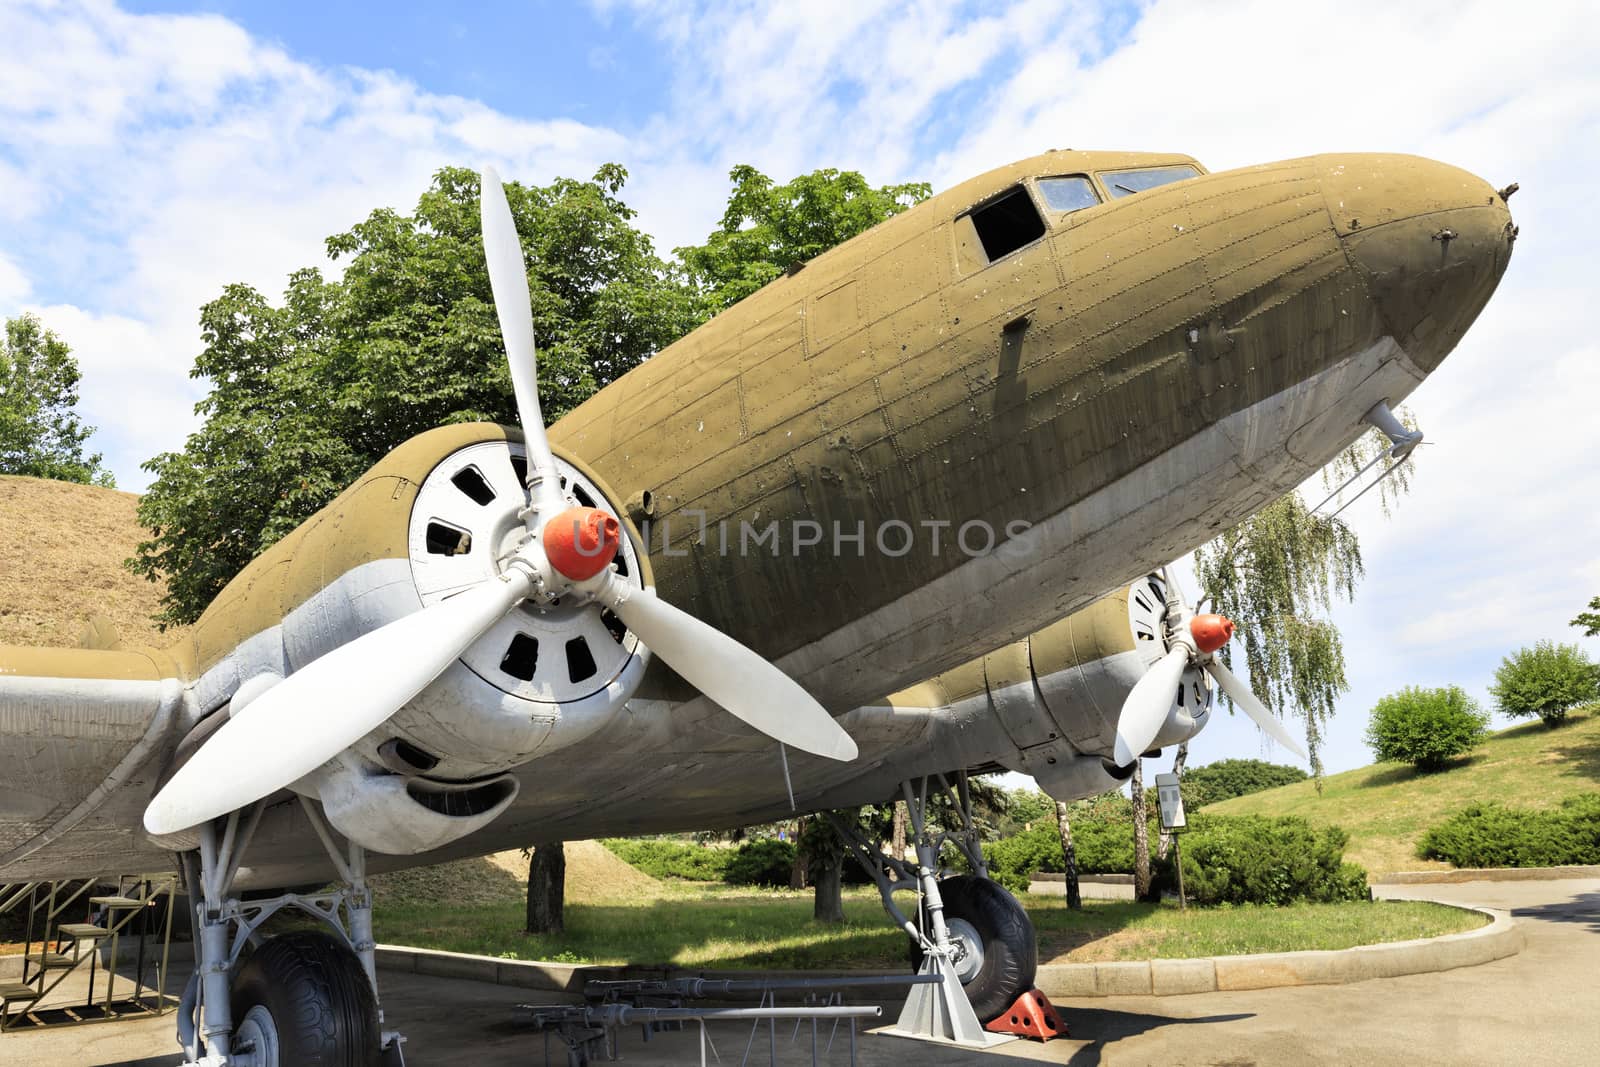 An old transport military aircraft Lisunov Li-2 of the Second World War, stands in a park against a cloudy blue sky.